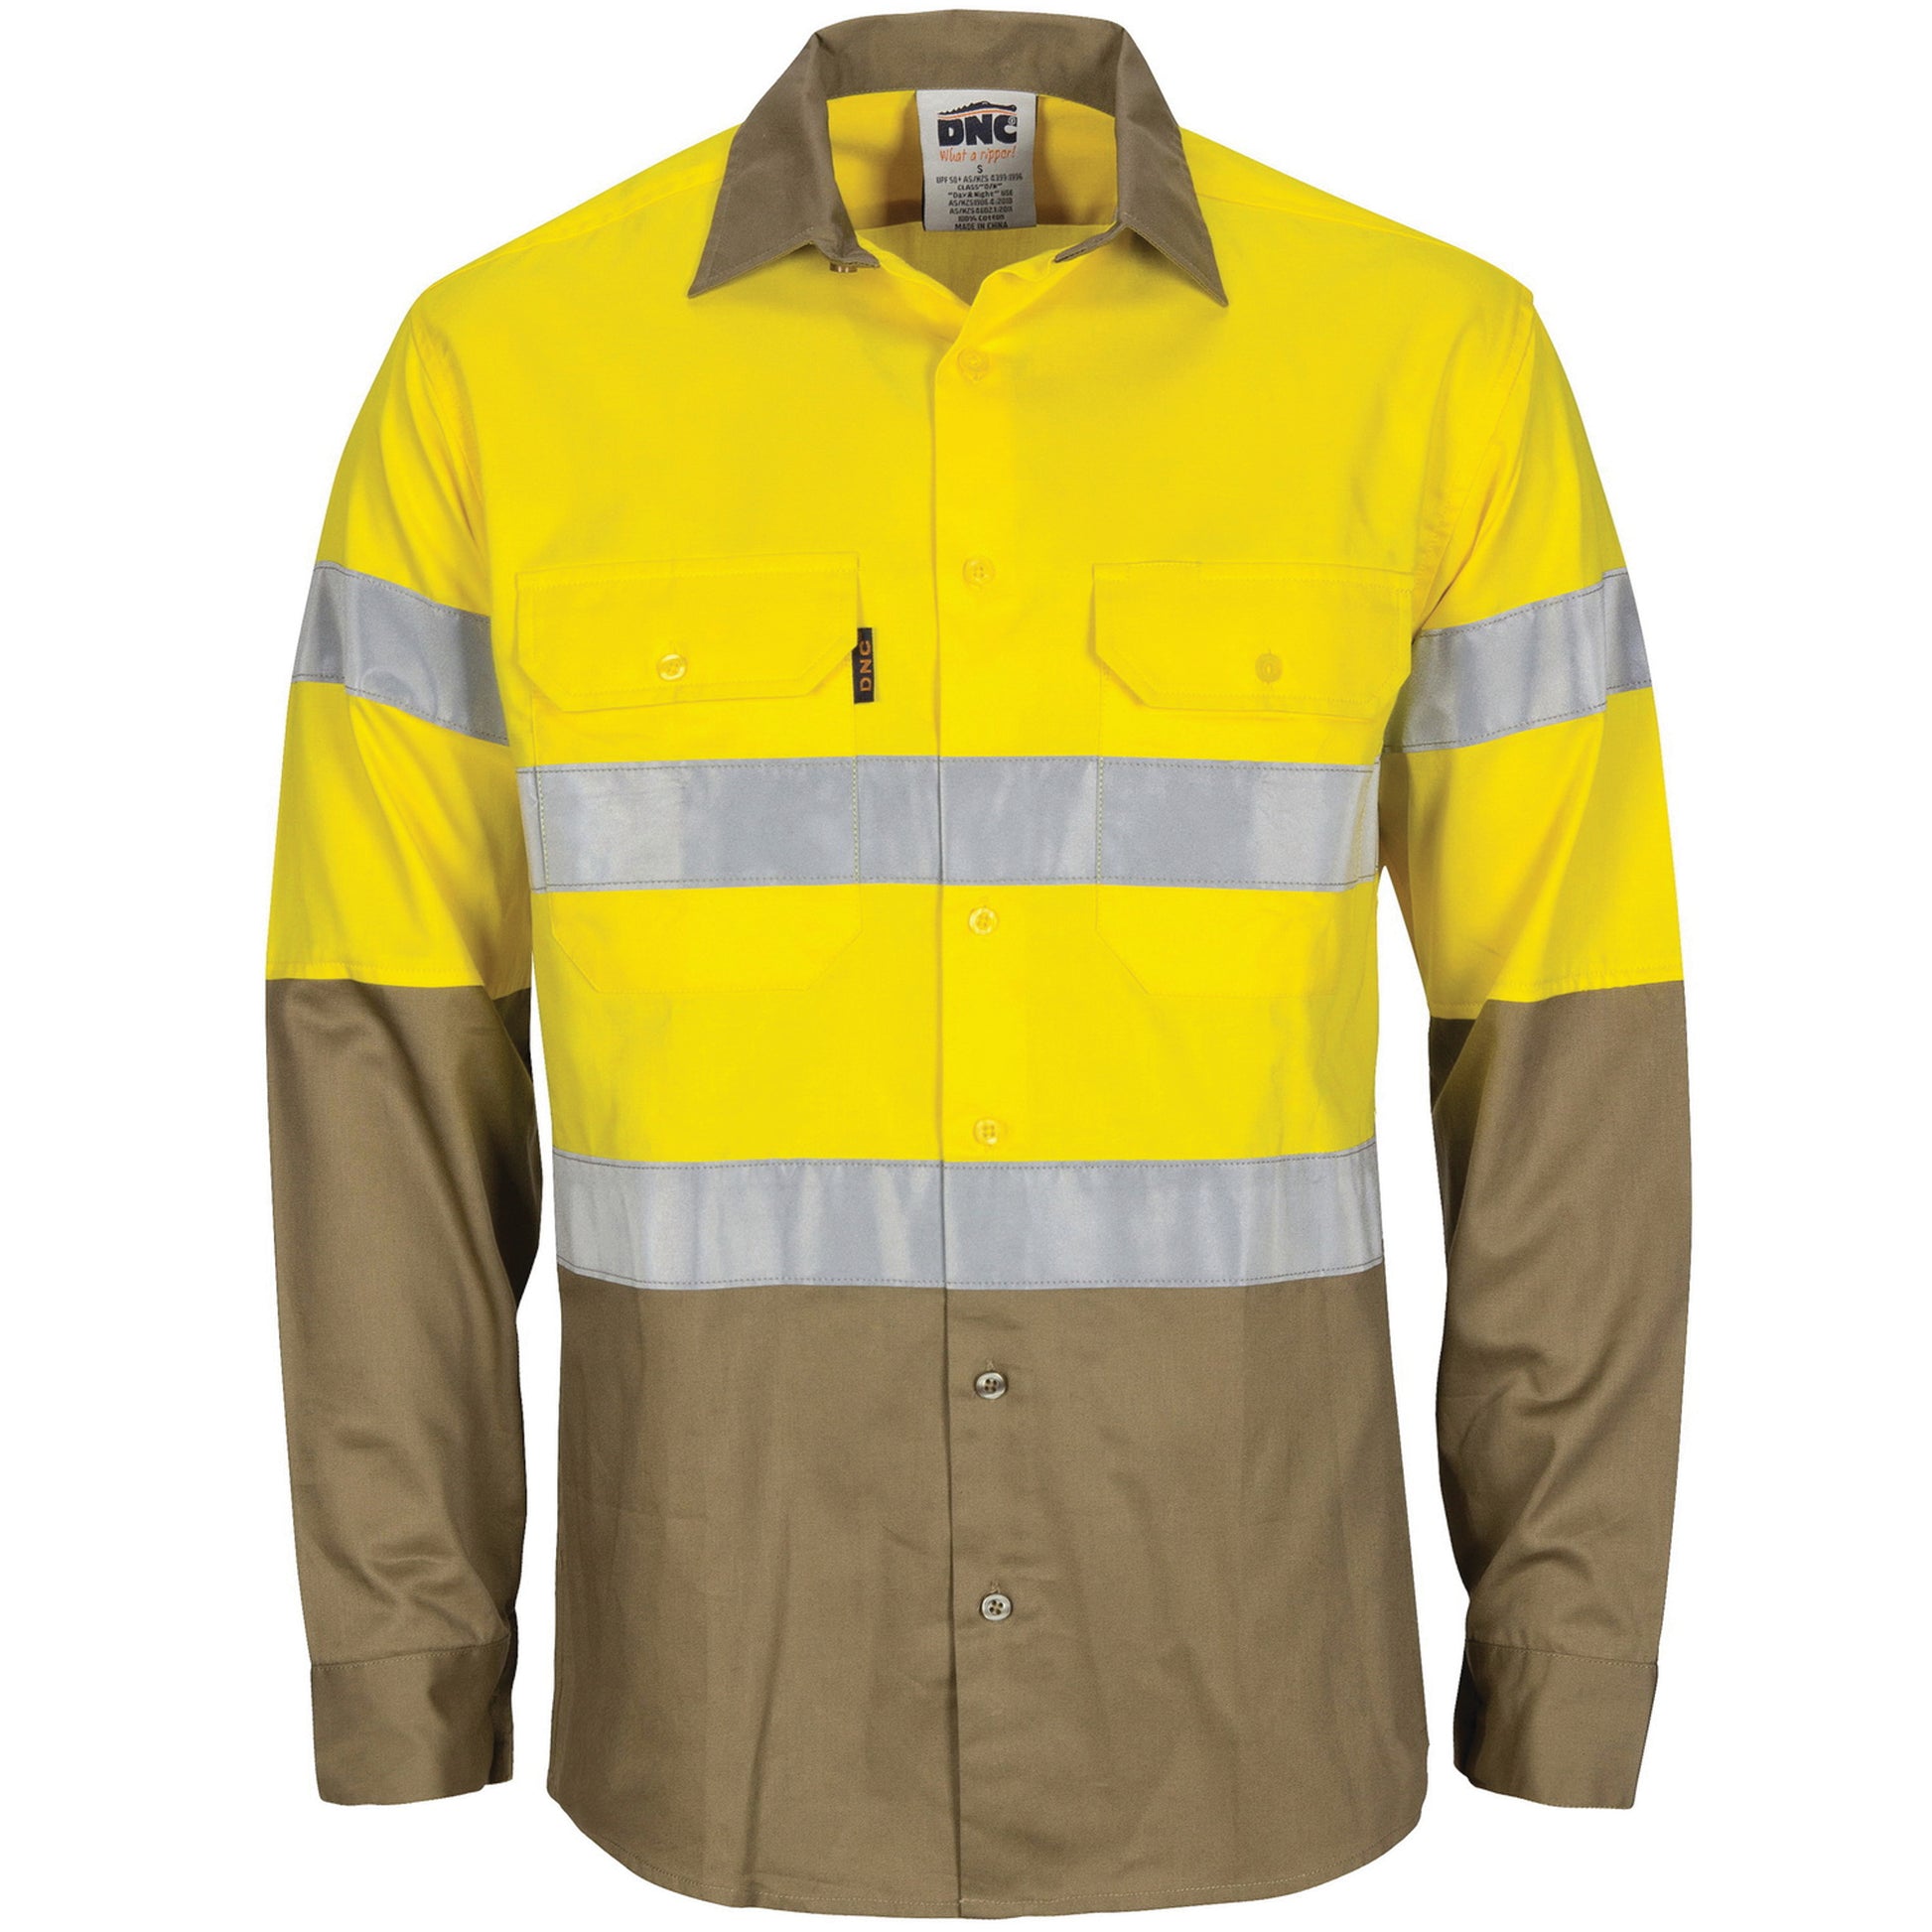 DNC HiVis L/W Cool-Breeze T2 Vertical Vented Cotton Shirt with Gusset Sleeves. Generic Tape - Long sleev 3784 - Star Uniforms Australia